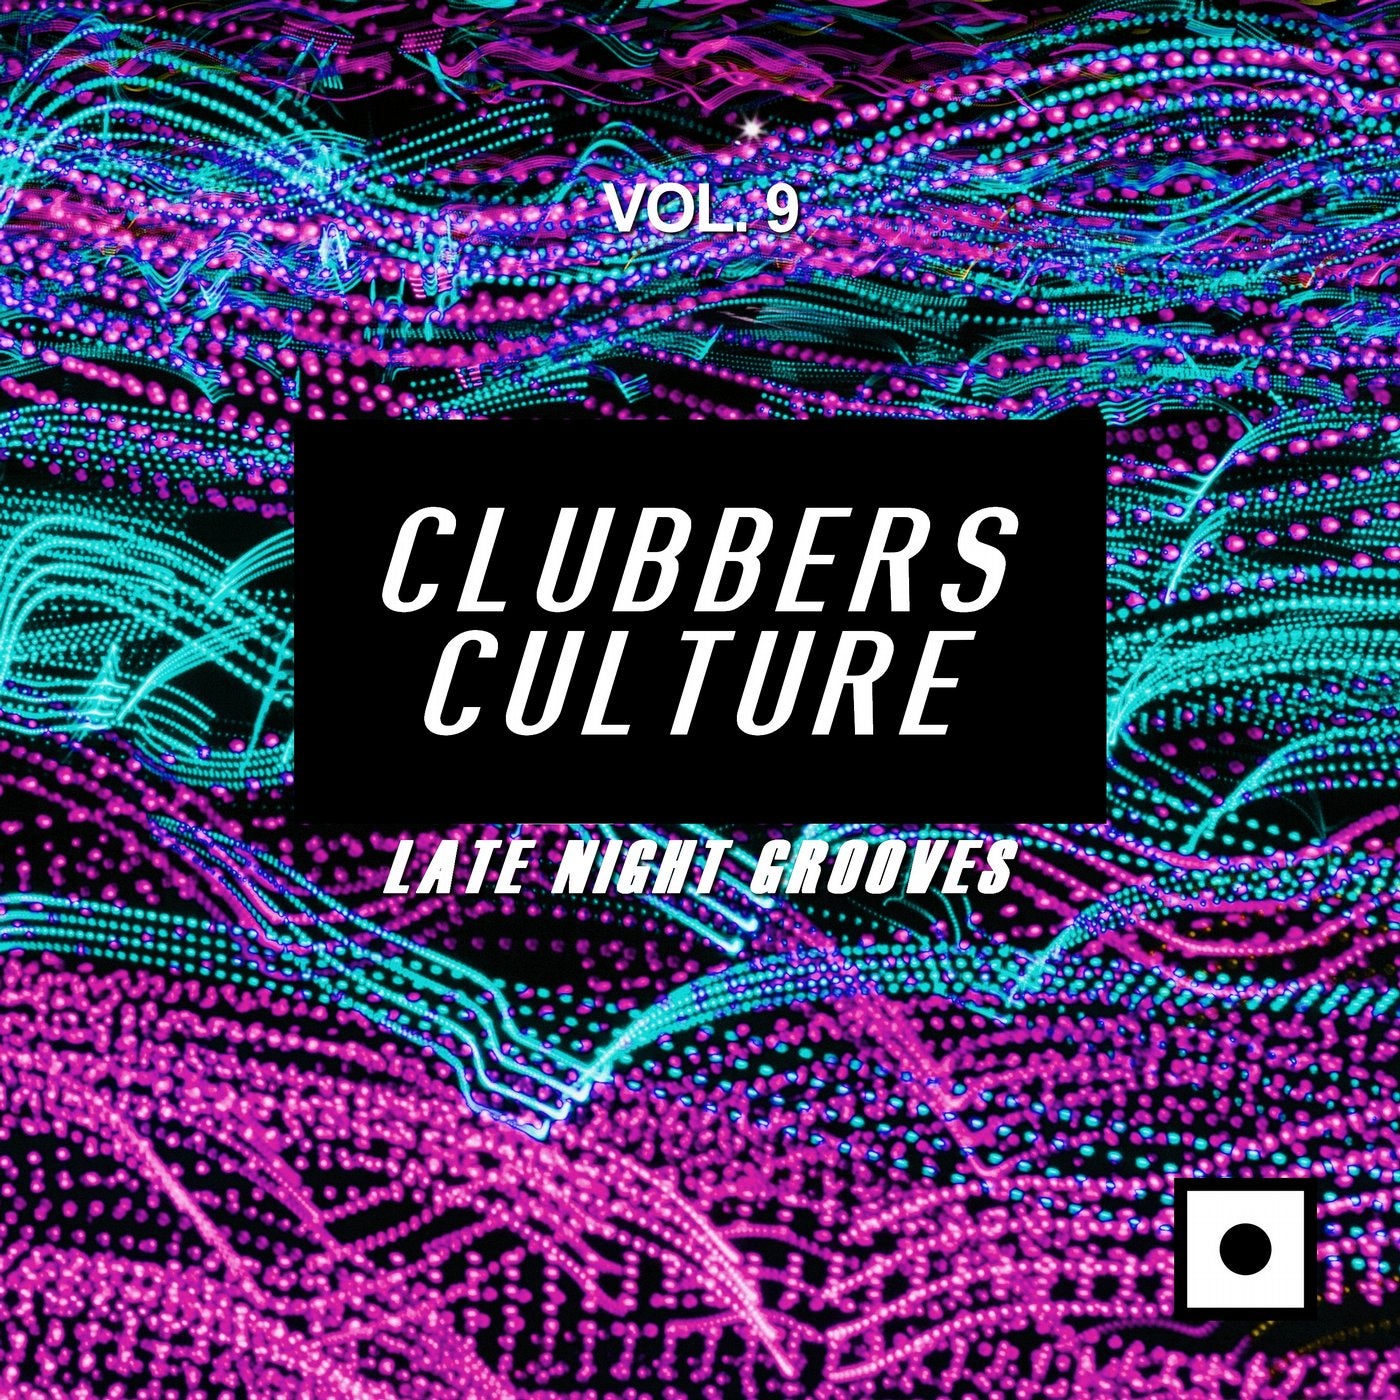 Clubbers Culture, Vol. 9 (Late Night Grooves)